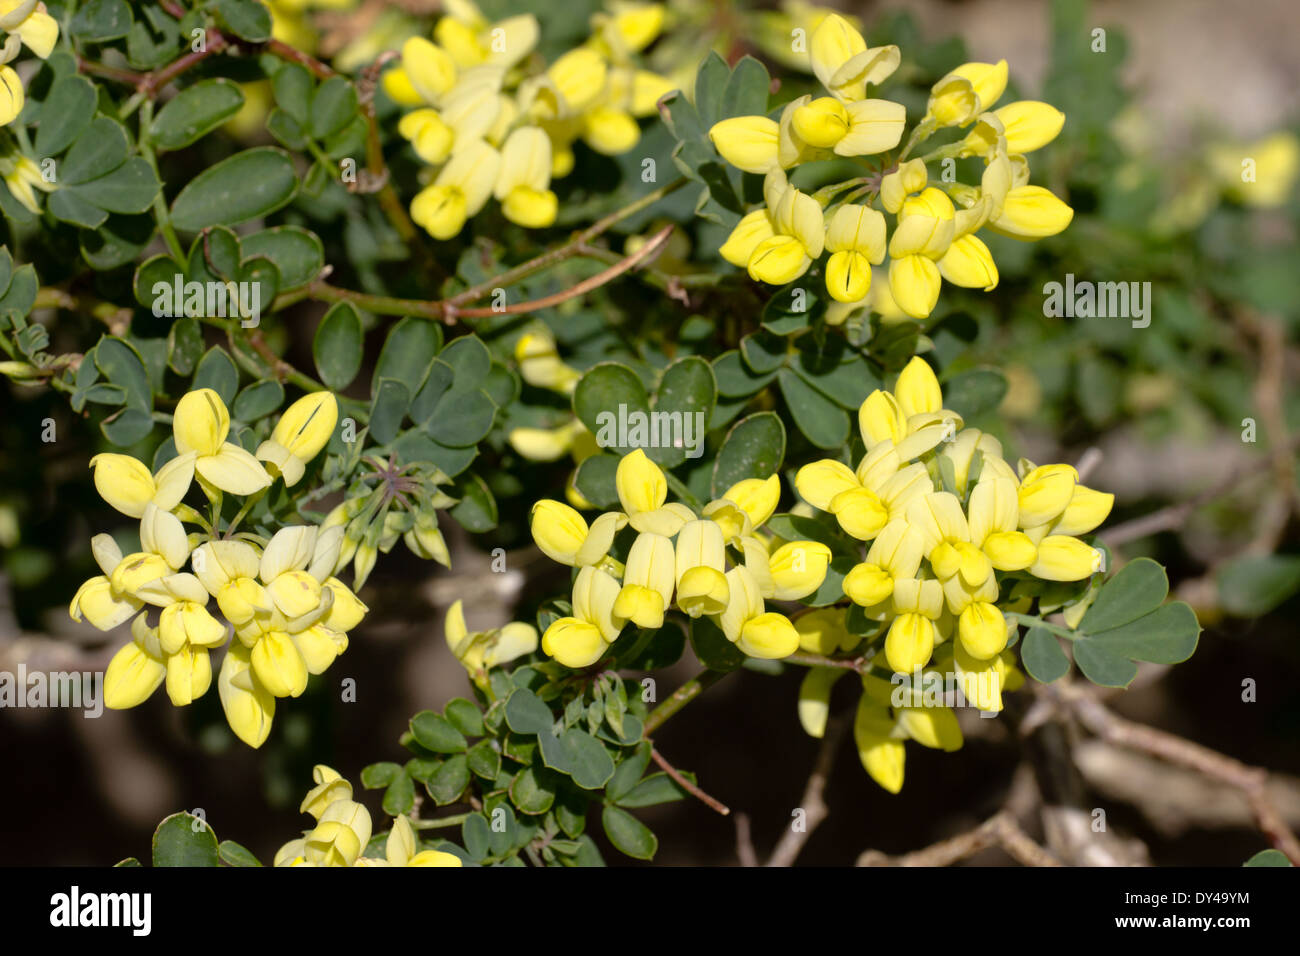 Fragrant yellow blooms of the long flowering shrubby Coronilla valentina subsp glauca Stock Photo